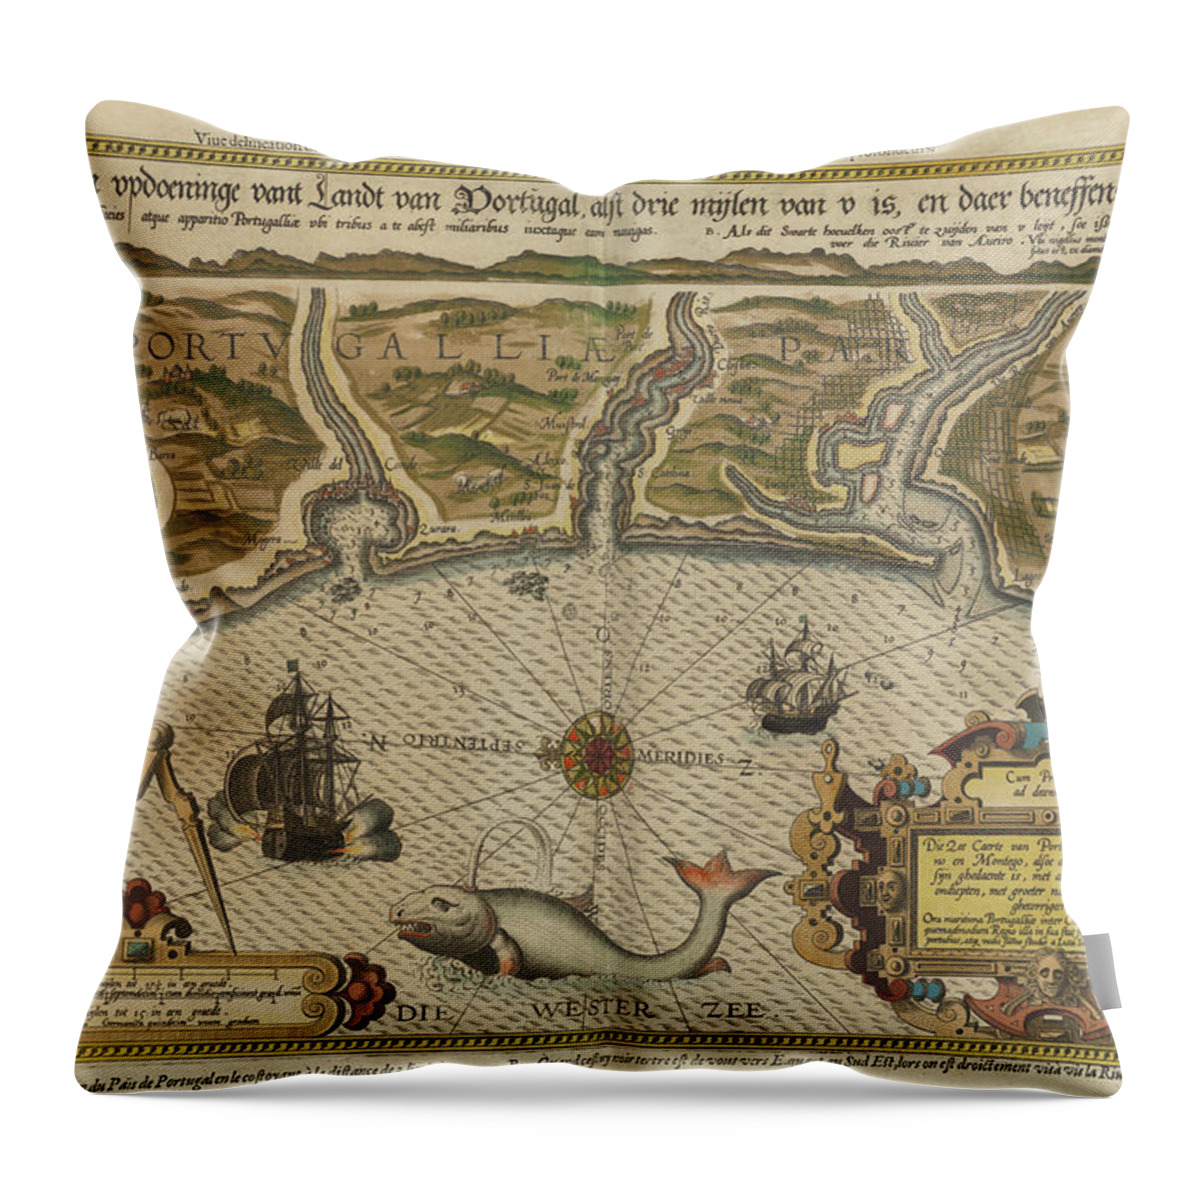 Antique Map Of Portugal Throw Pillow featuring the drawing Antique Maps - Old Cartographic maps - Antique Map of Portugal - Portuguese Coast by Studio Grafiikka